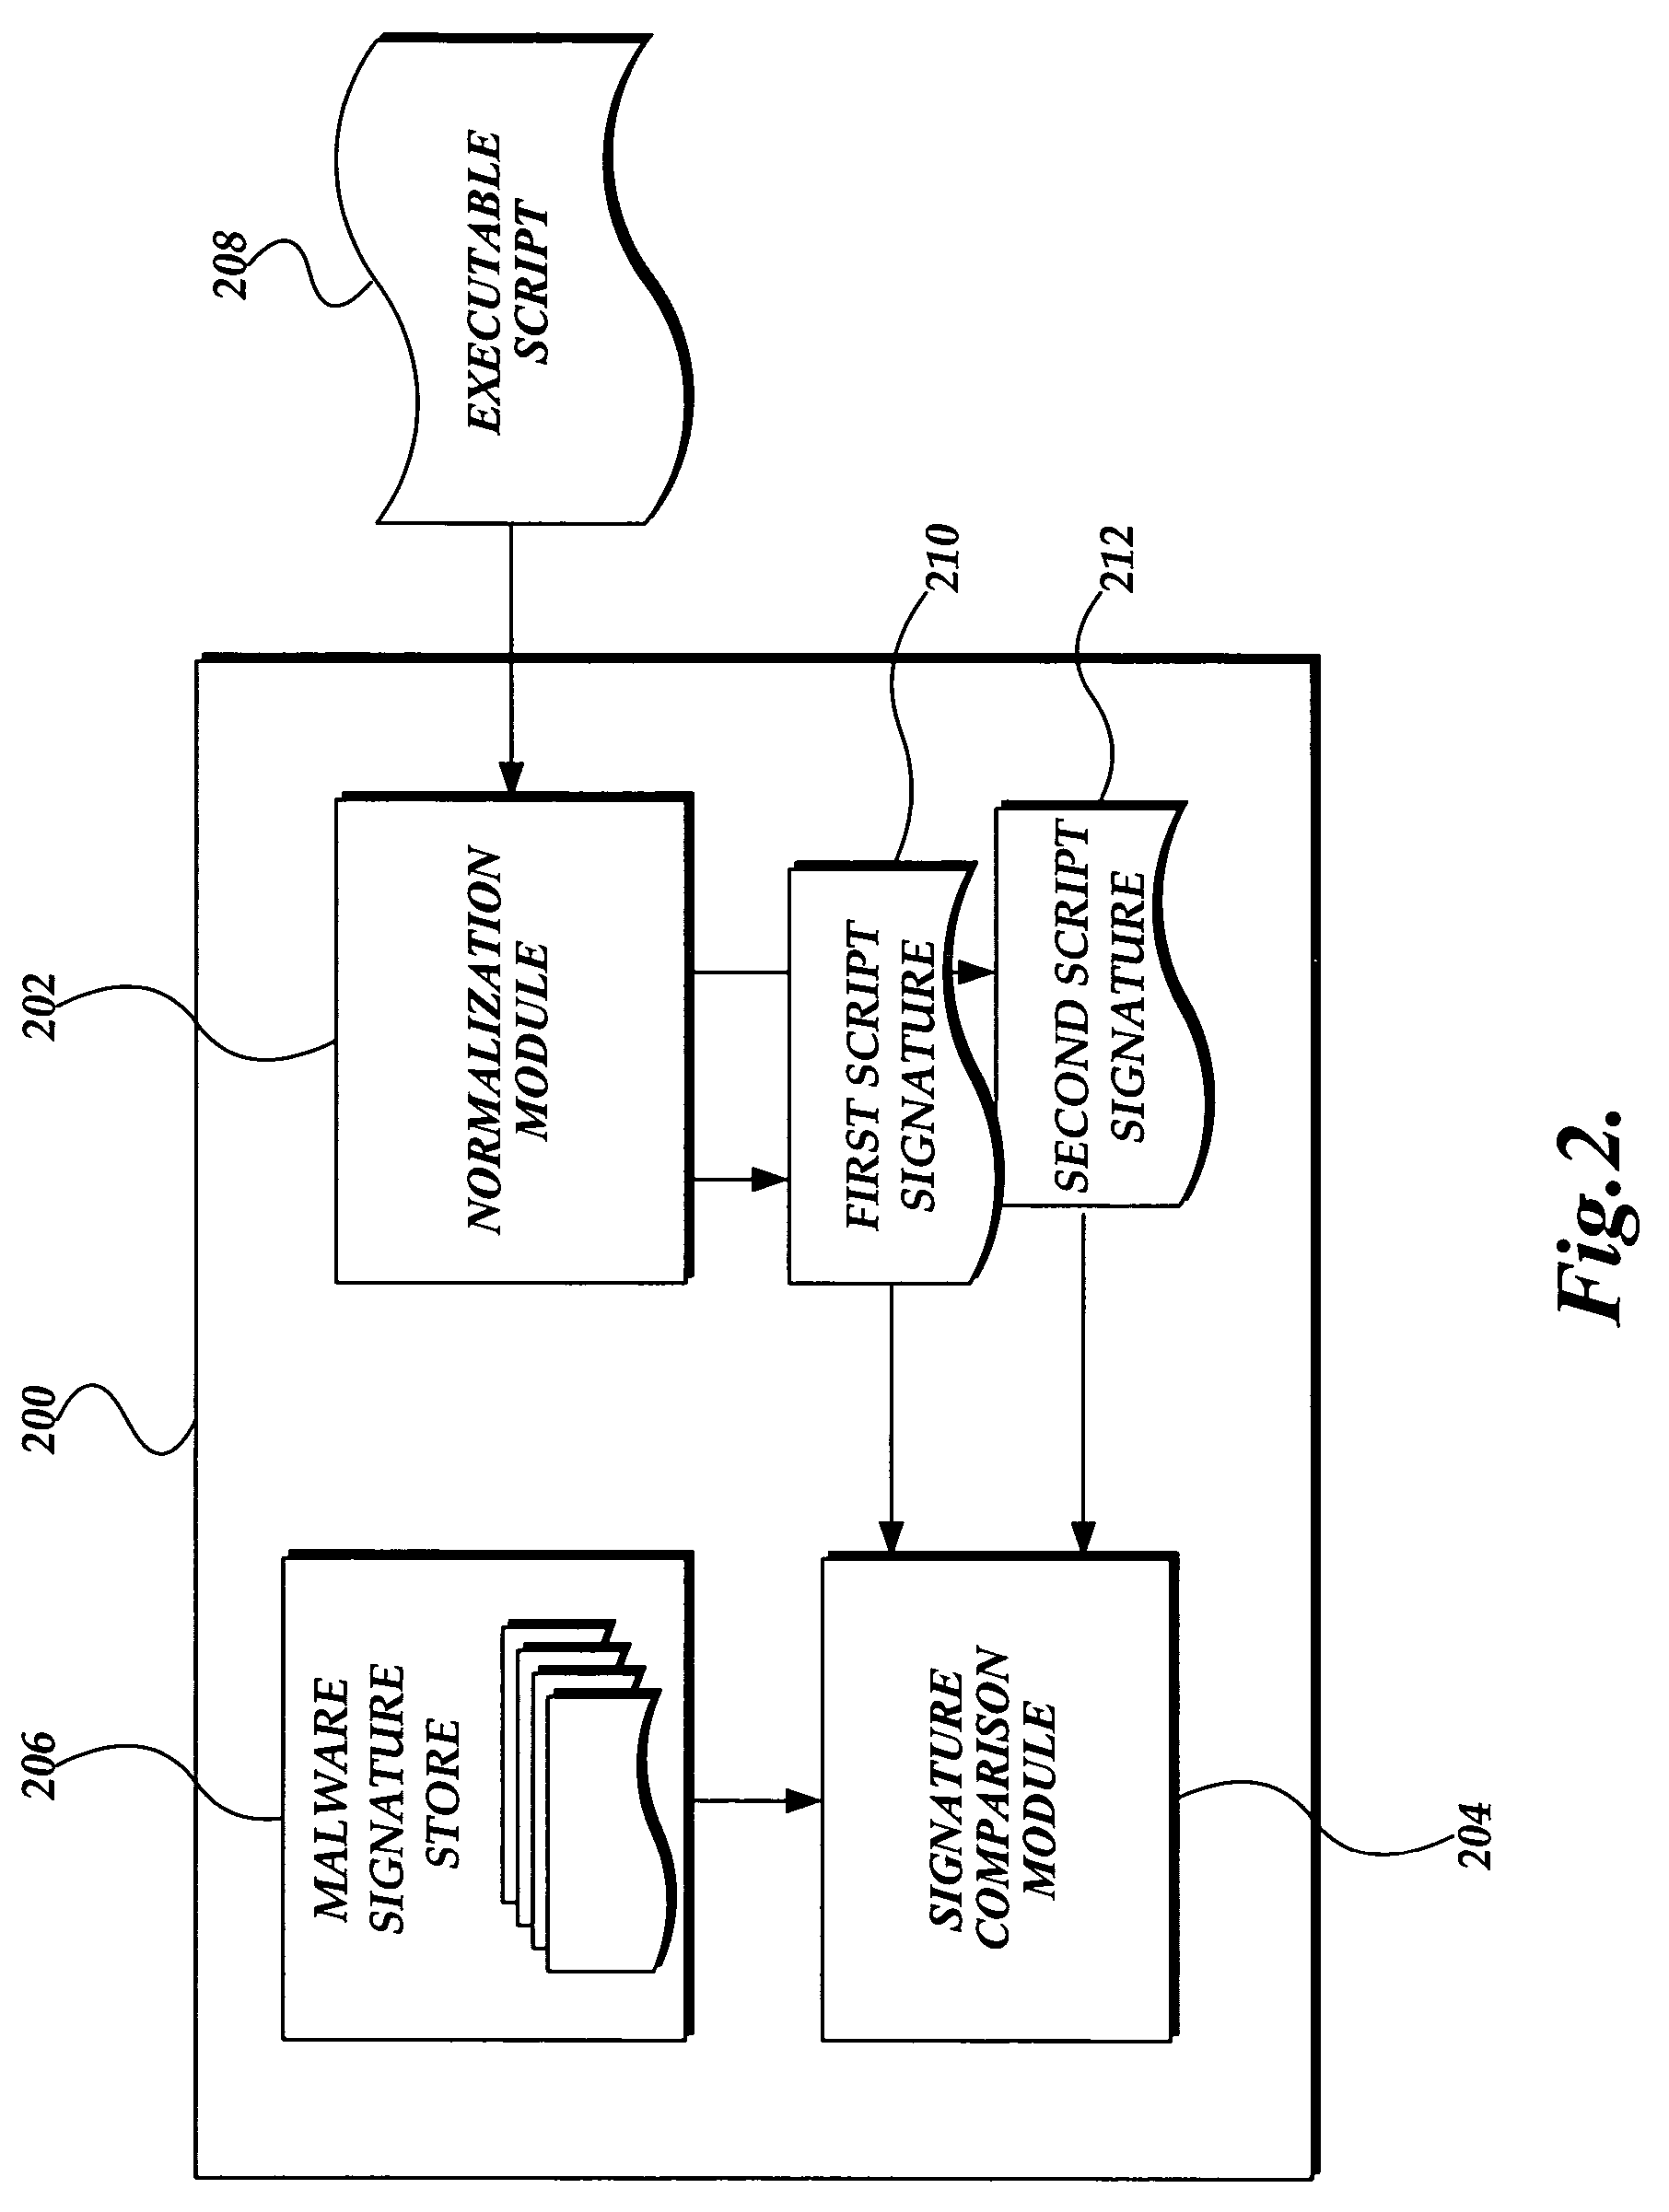 System and method for detecting malware in executable scripts according to its functionality